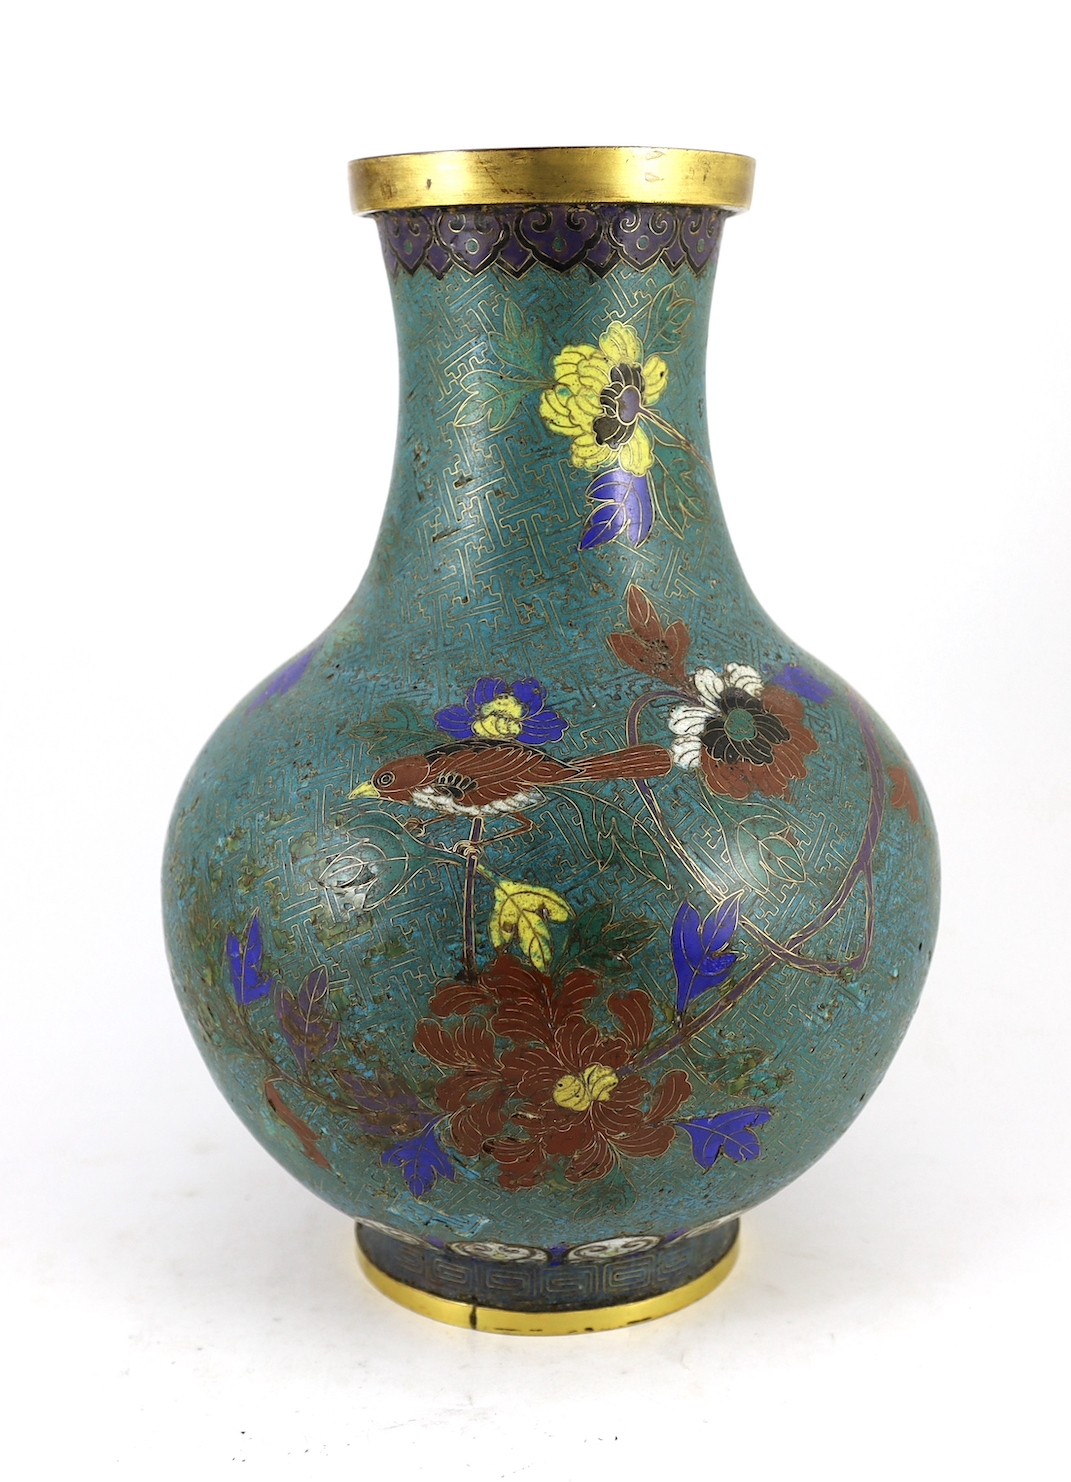 A large Chinese cloisonné enamel and gilt bronze mounted bottle vase, 18th/19th century 42.5 cm high, some losses and restoration to enamel